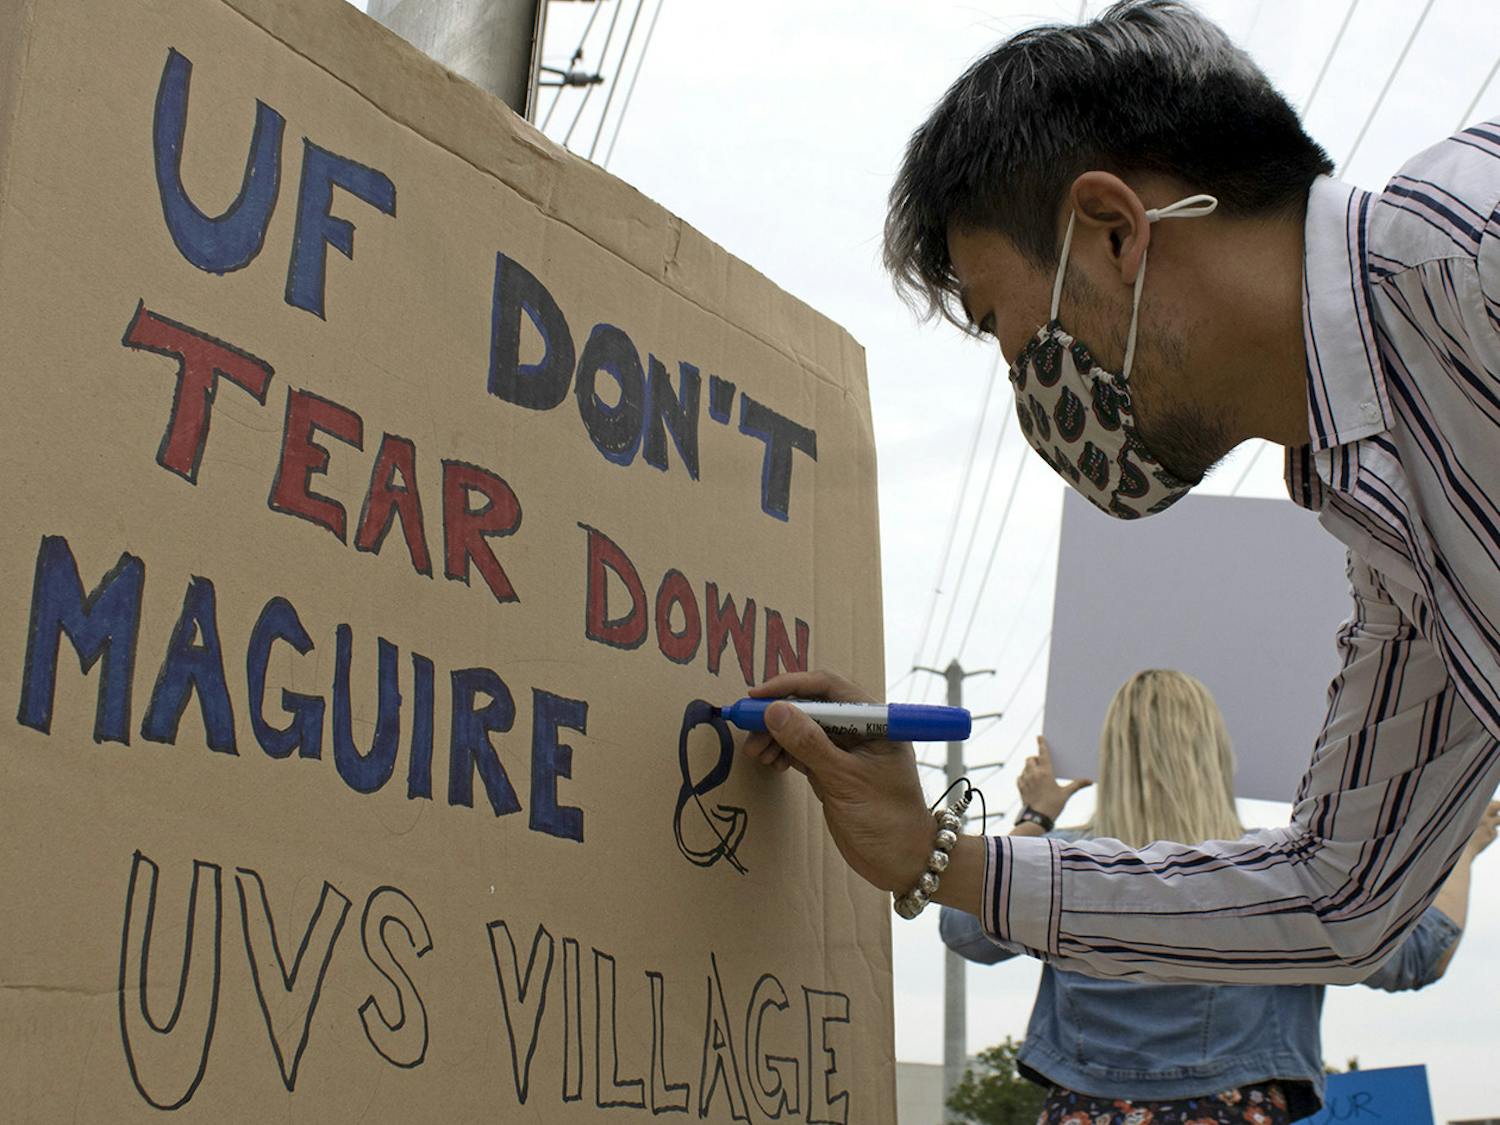 Edward Ke Sun, 30, a PhD candidate for architectural history, theory and criticism at UF, colors a sign that reads “UF Don’t Tear Down Maguire & UVS Village” on Friday, April 9, 2021. Sun protesting to raise awareness about UF’s plan to demolish three out of the five graduate student housing complexes in Gainesville.